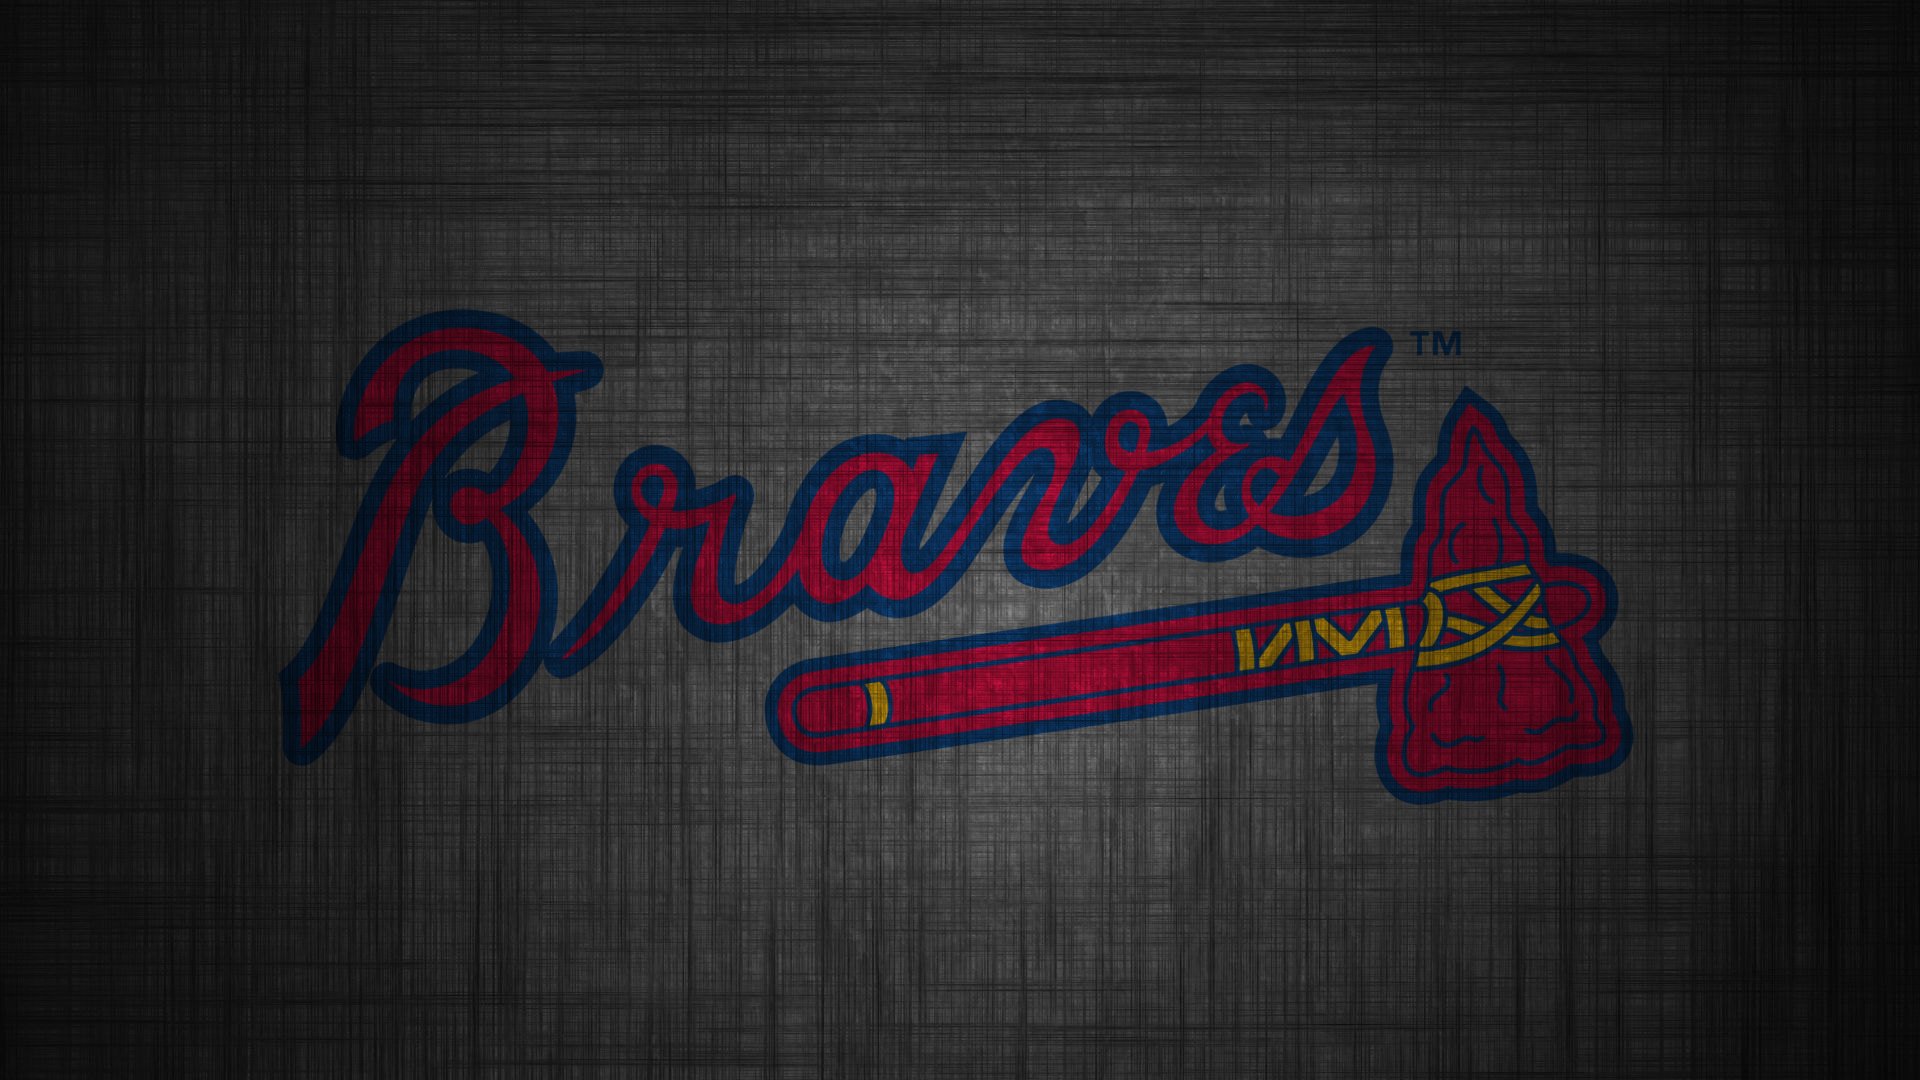 Braves Wallpapers